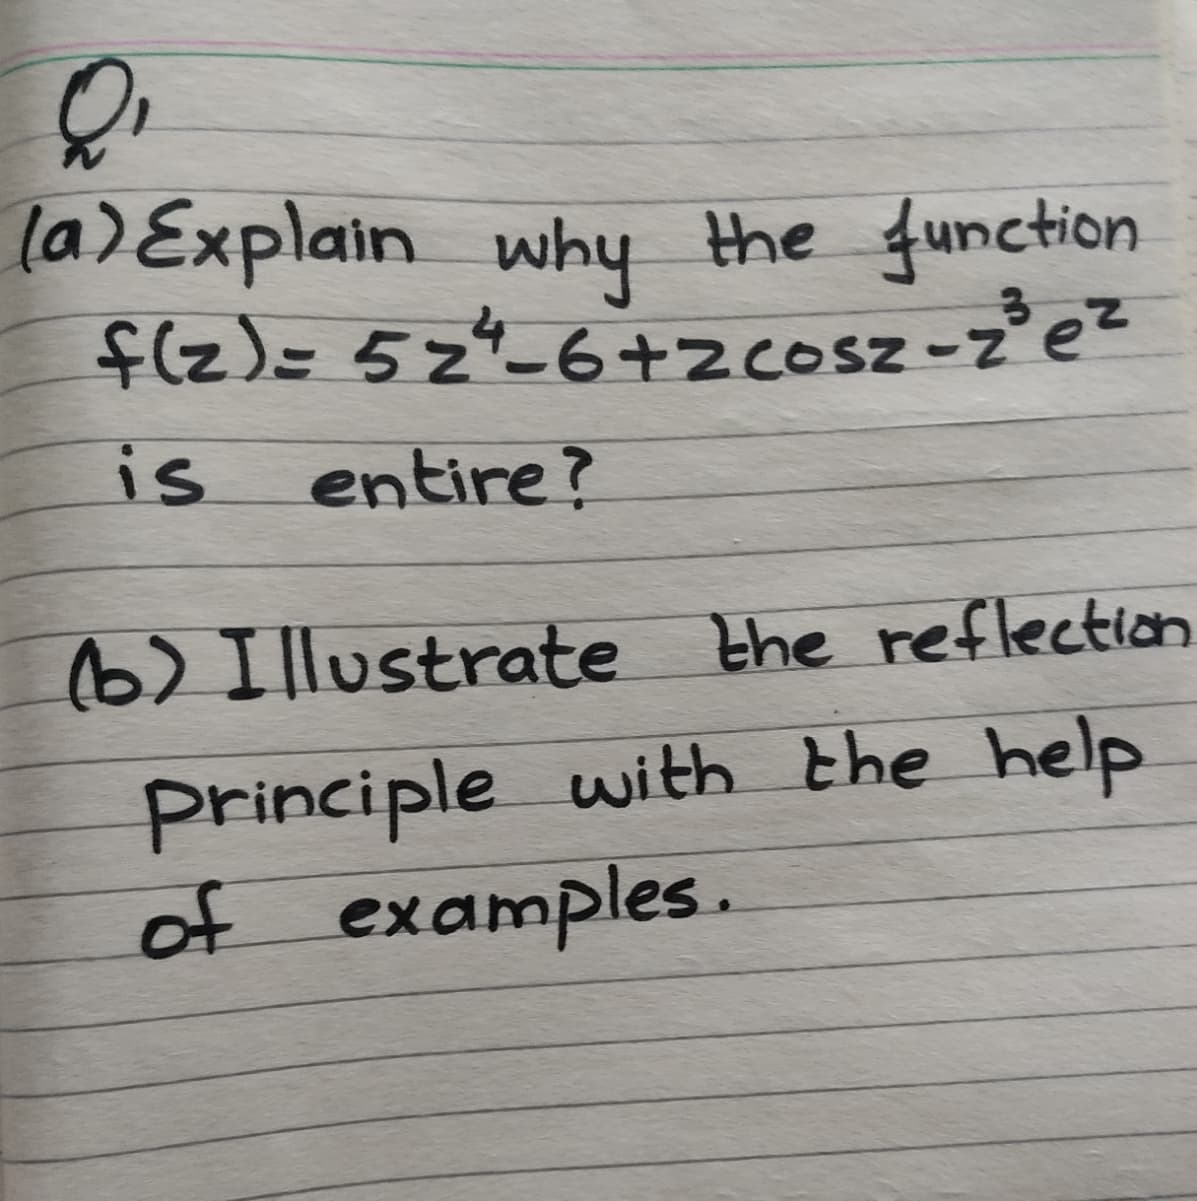 la)Explain why the function
fIz)=52%6+2cosz-z°e²
is
entire?
(6) Illustrate
the reflection
Principle with the help
of examples.
